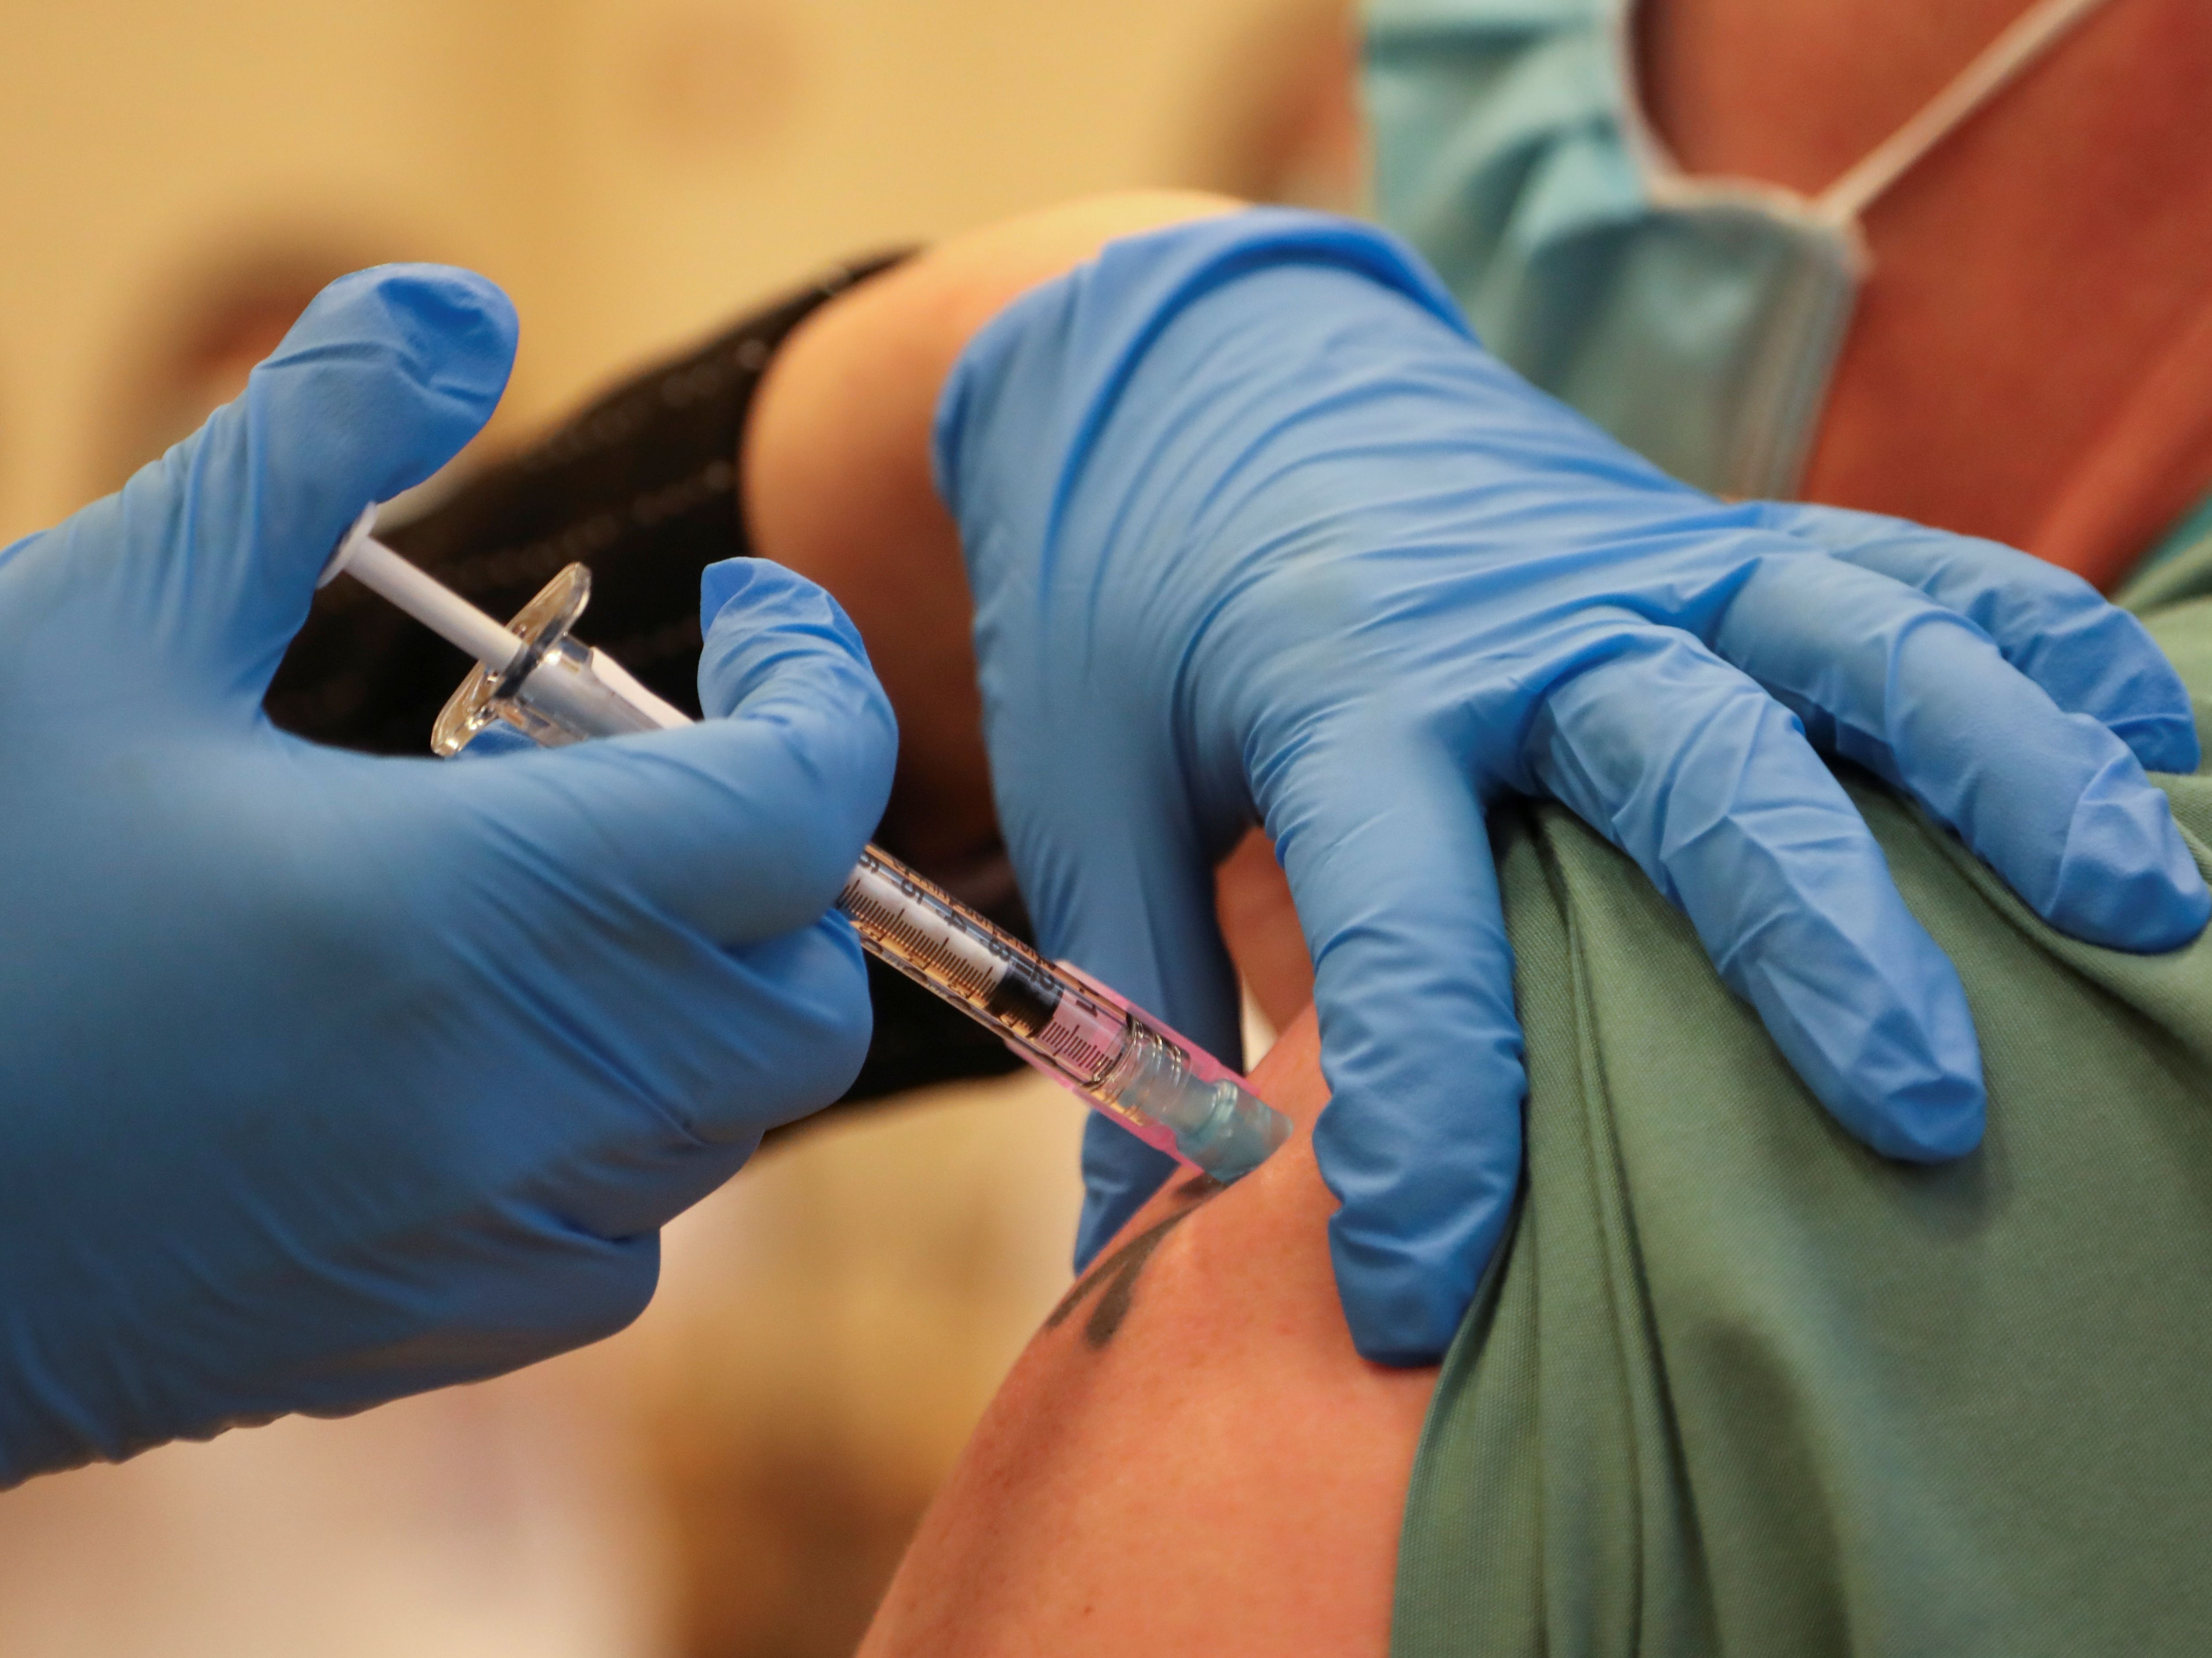 A man is injected with Pfizer’s vaccine at the Michener Institute in Toronto